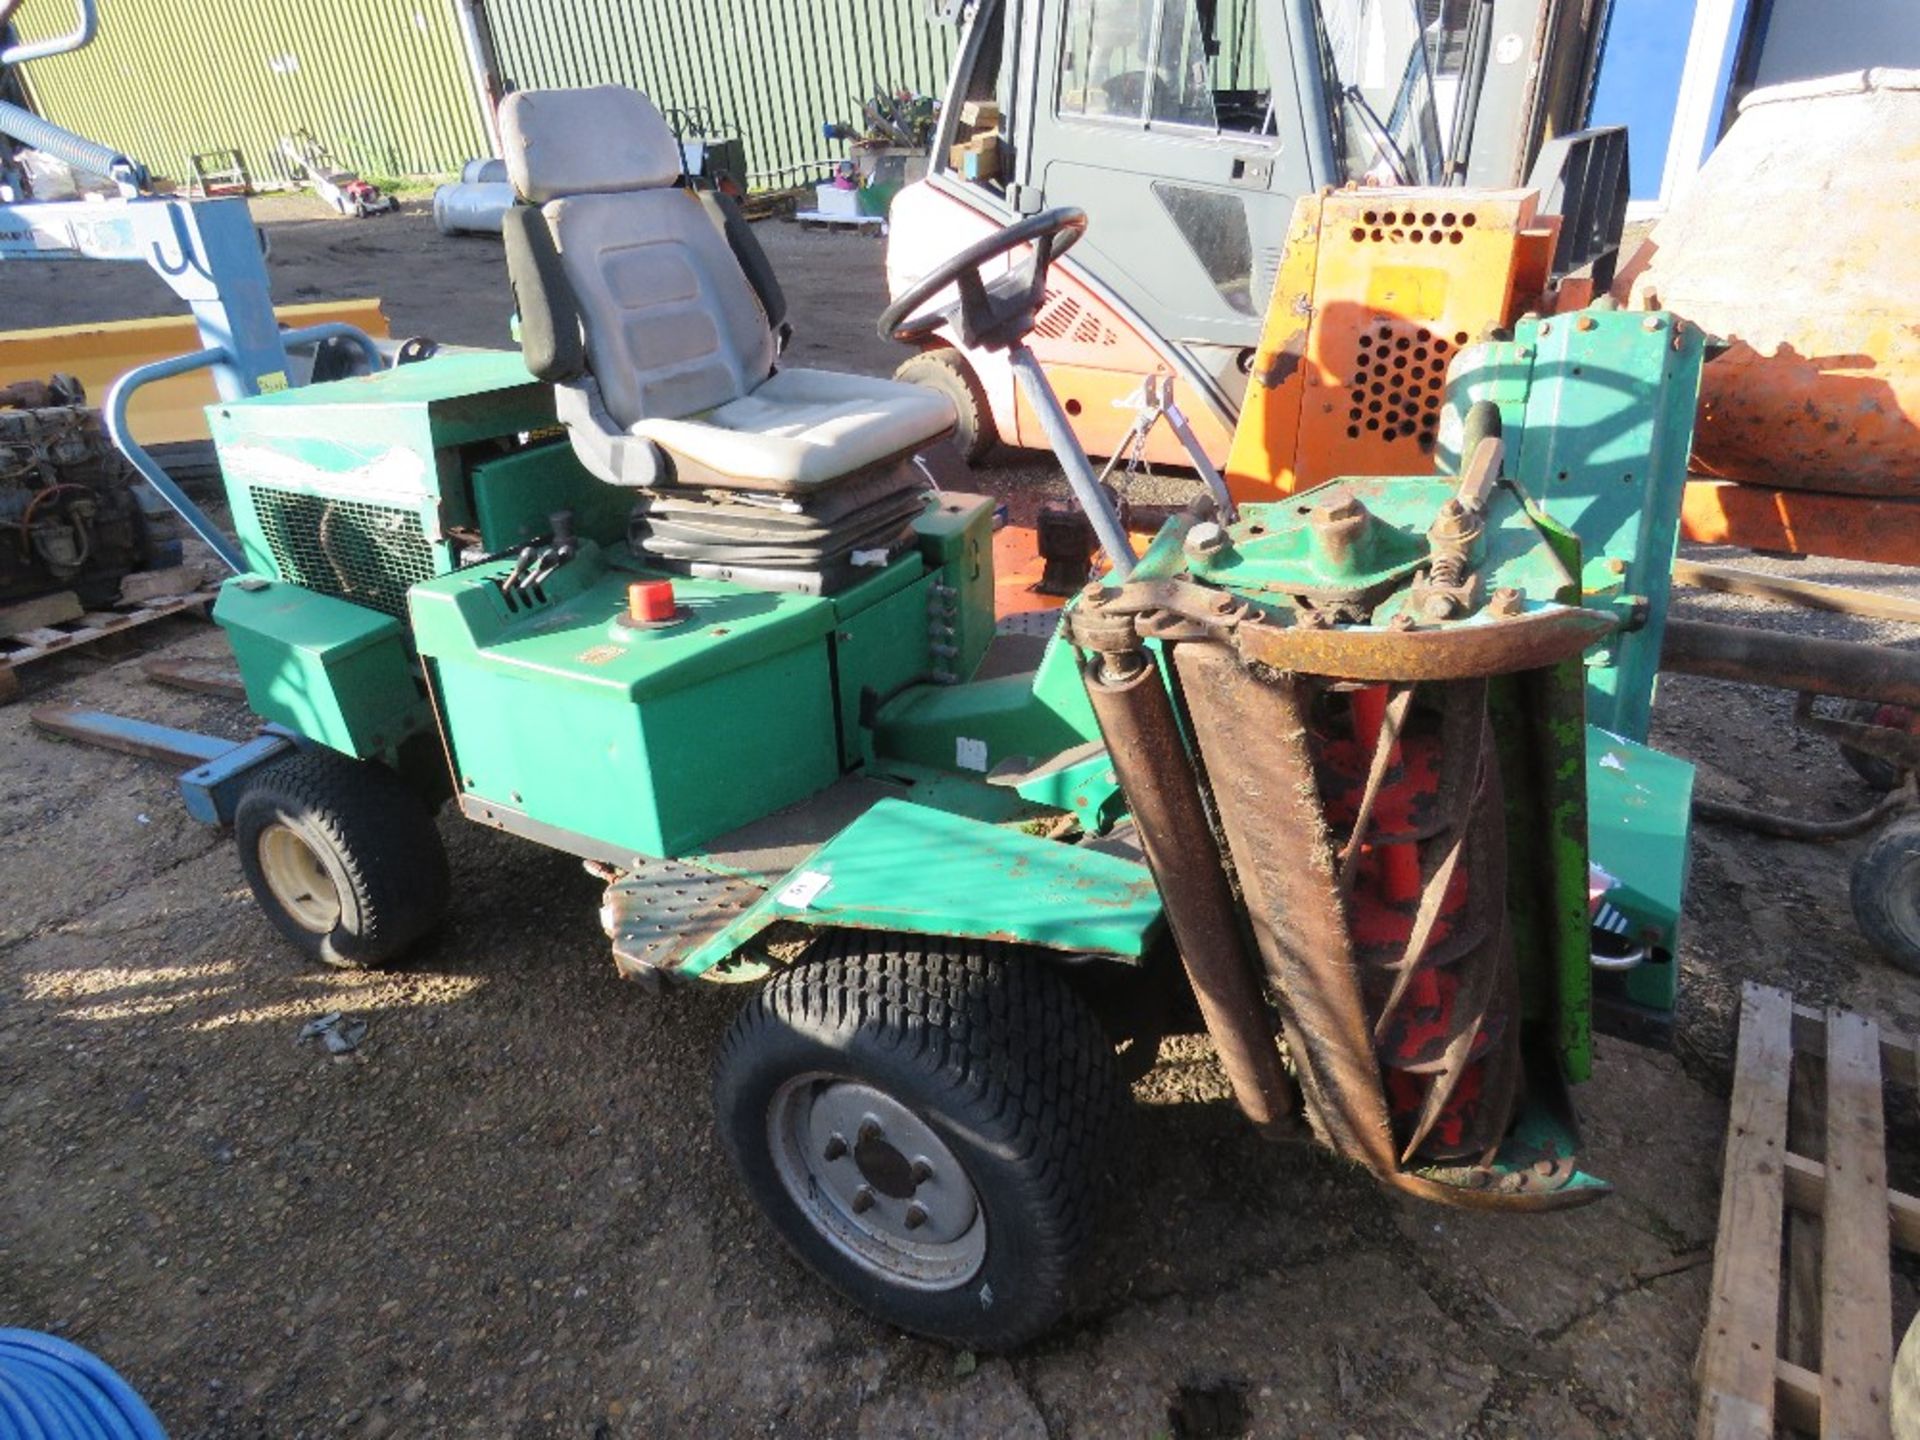 RANSOMES TRIPLE RIDE ON MOWER WITH KUBOTA ENGINE. BEEN IN STORAGE FOR SOME TIME. WHEN BRIEFLY TESTED